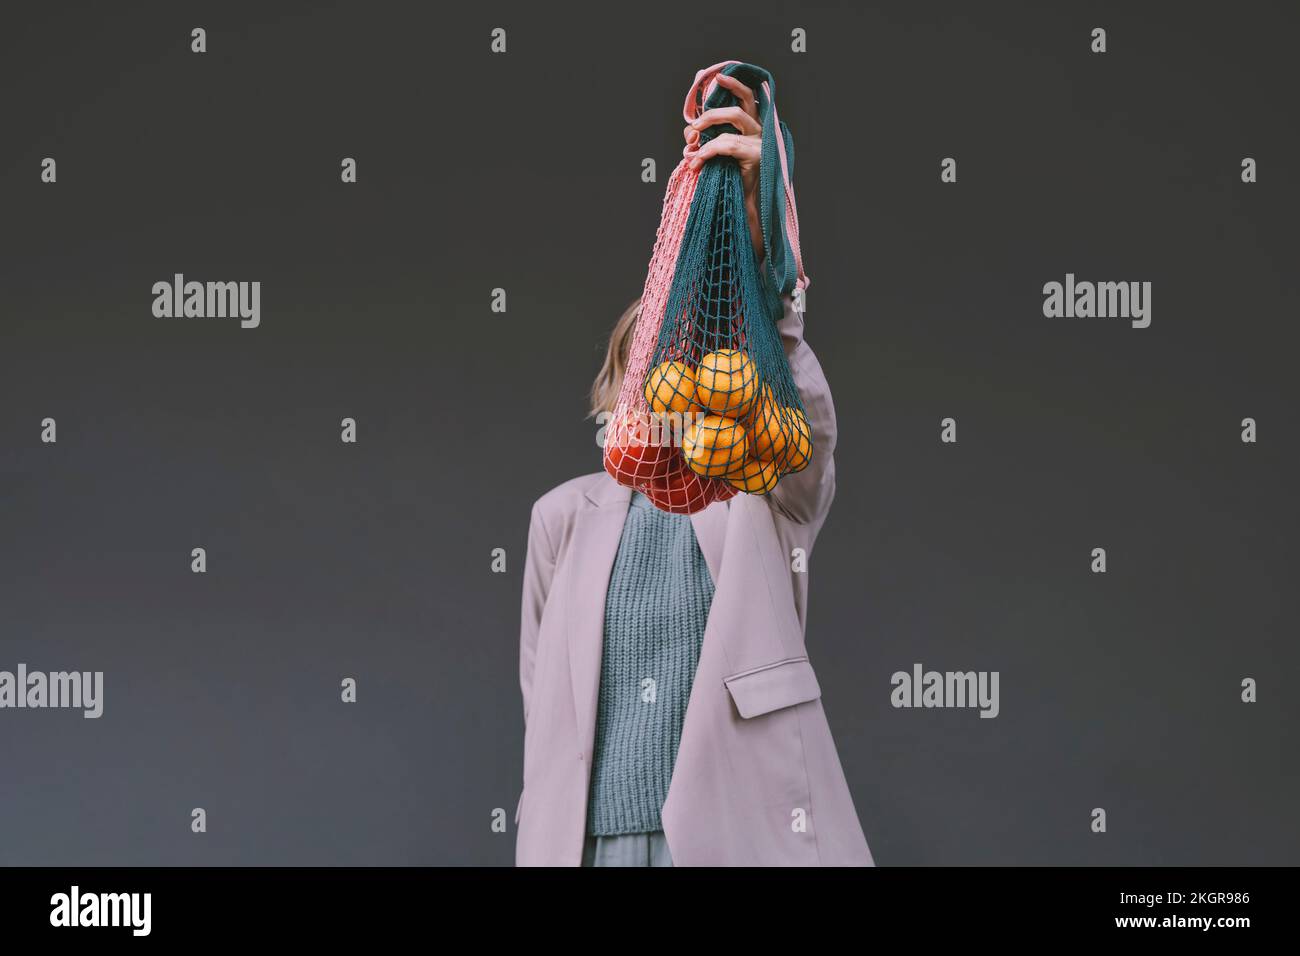 Woman covering face with mesh bag in front of gray wall Stock Photo